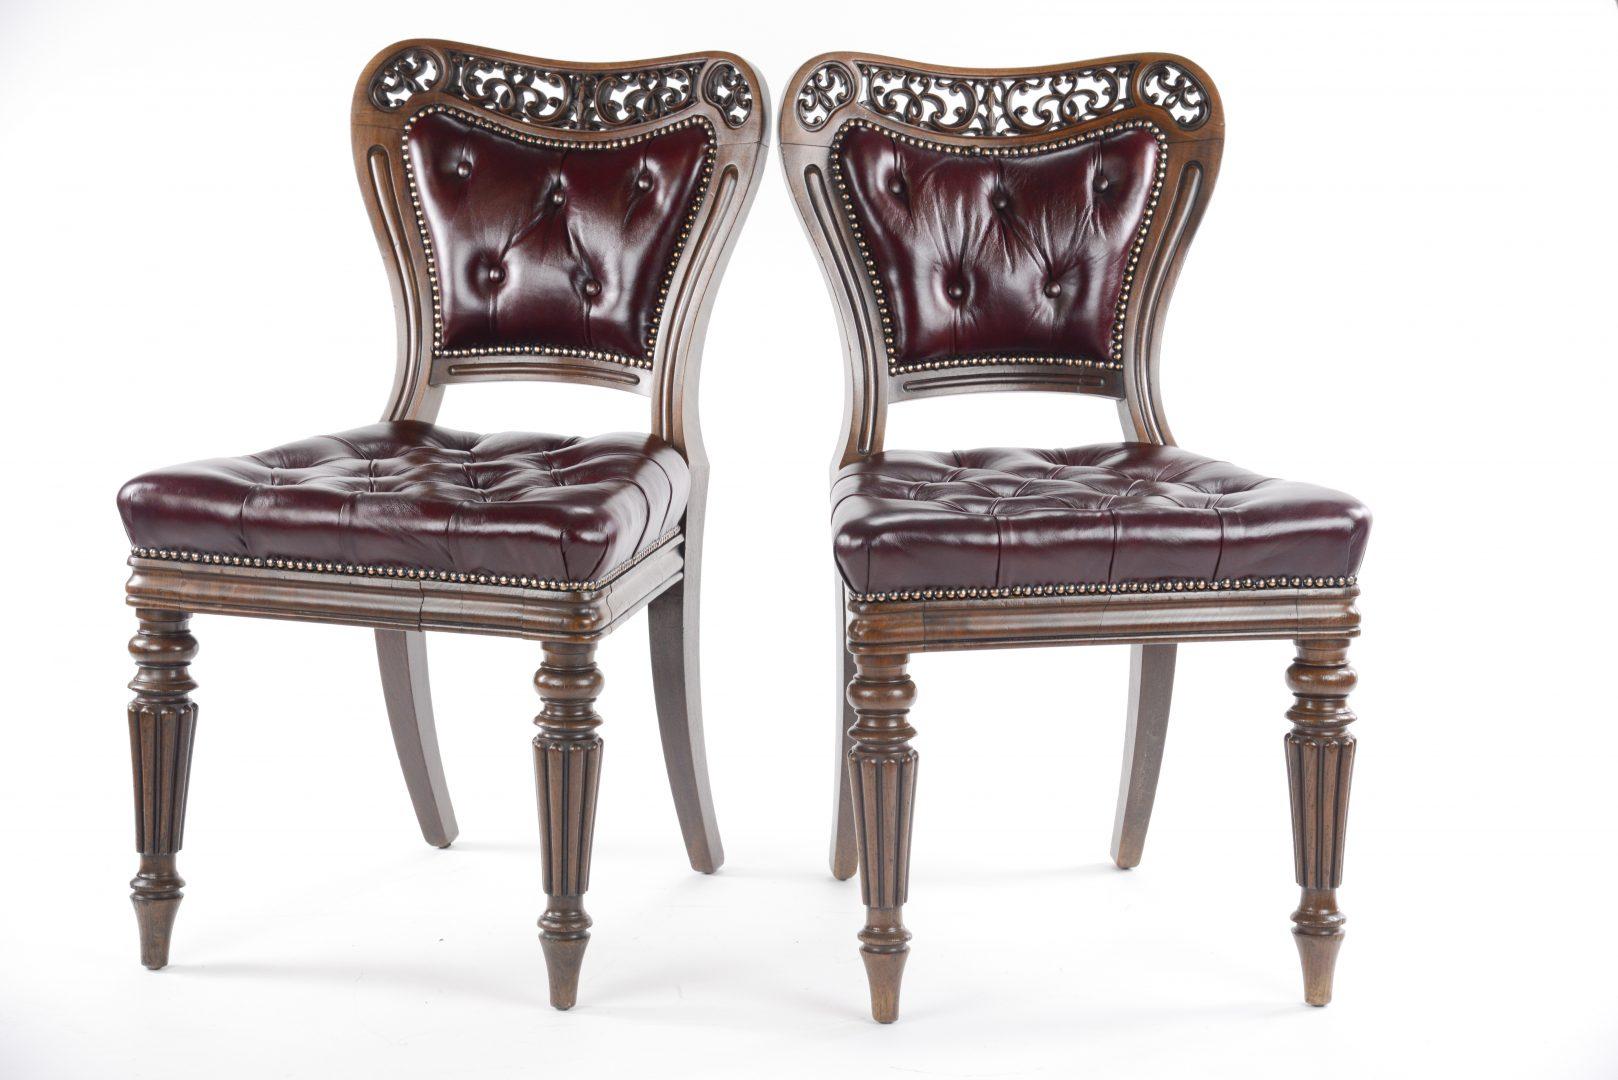 19th Century Pair of Very Fine George IV Library Chairs, Firmly Attributed to Gillows